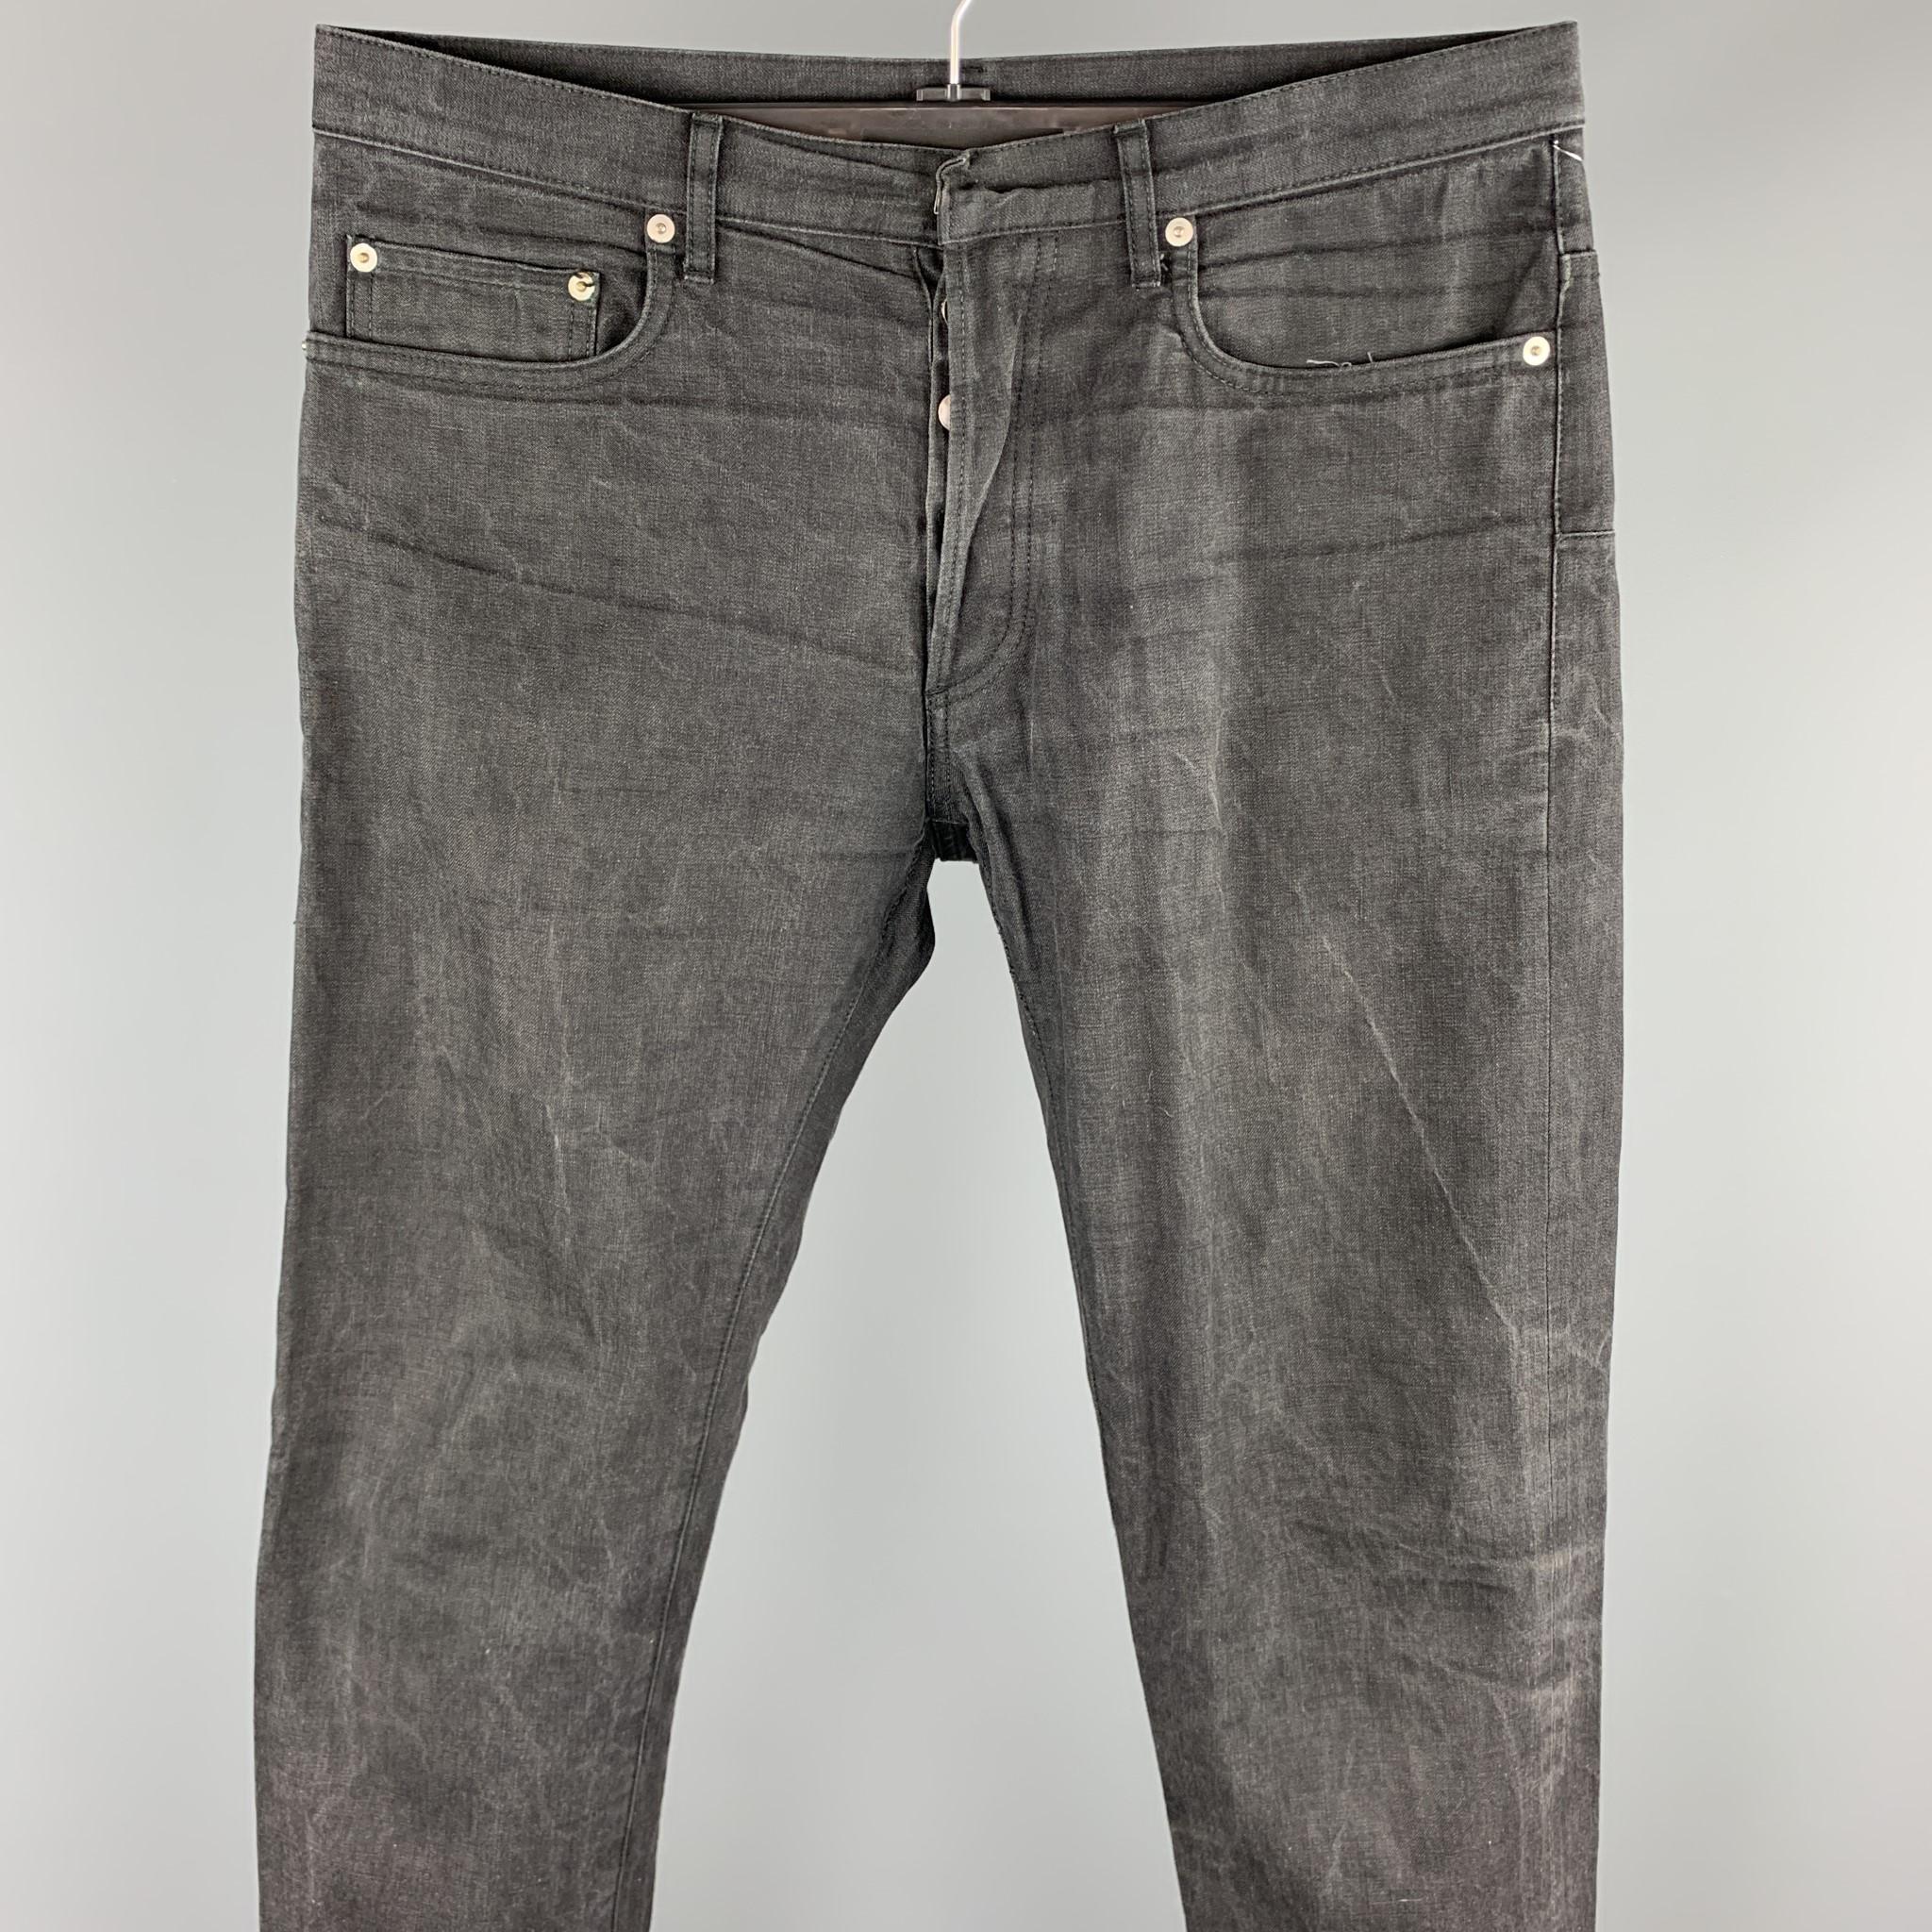 DIOR HOMME jeans comes in a black washed denim featuring a regular fit and a button fly closure. Made in Japan.

Very Good Pre-Owned Condition.
Marked: 32

Measurements:

Waist: 34 in.
Rise: 9 in. 
Inseam: 31 in. 